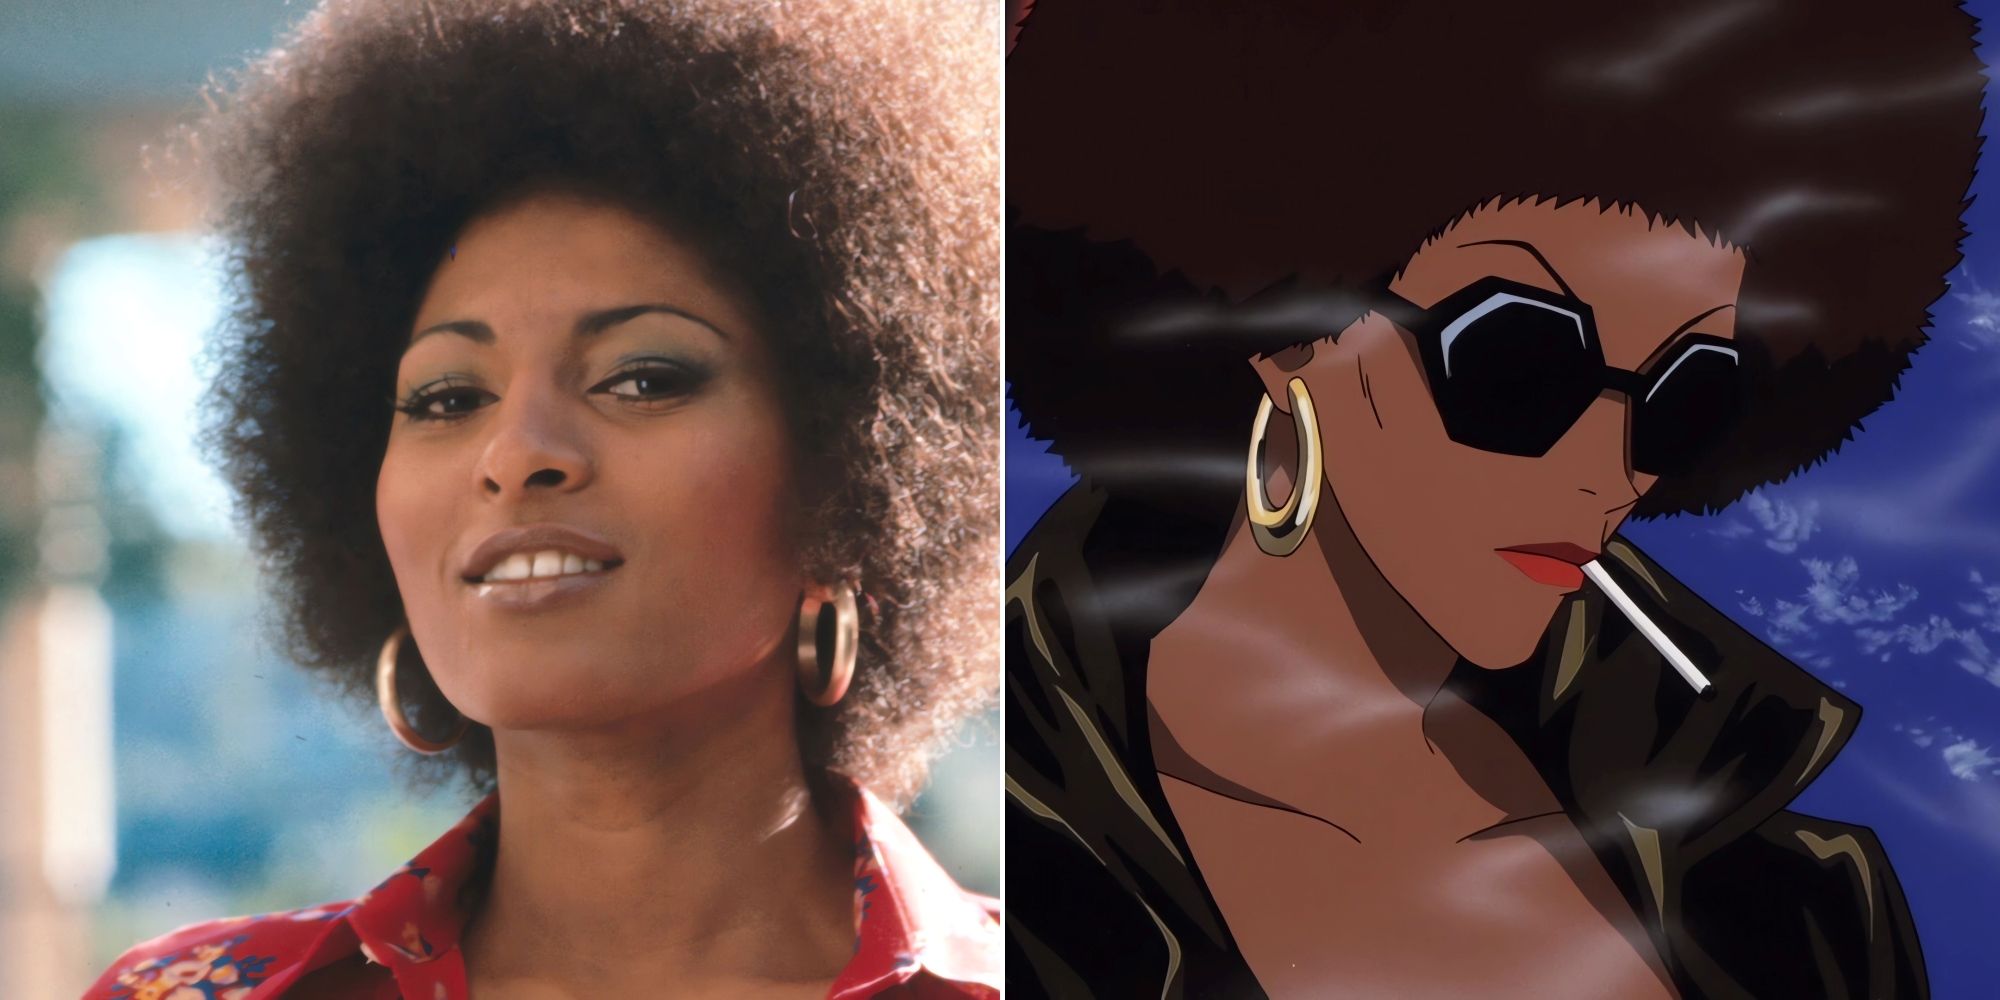 Collage Pam Grier in the movie Coffy And Coffee from Cowboy Bebop